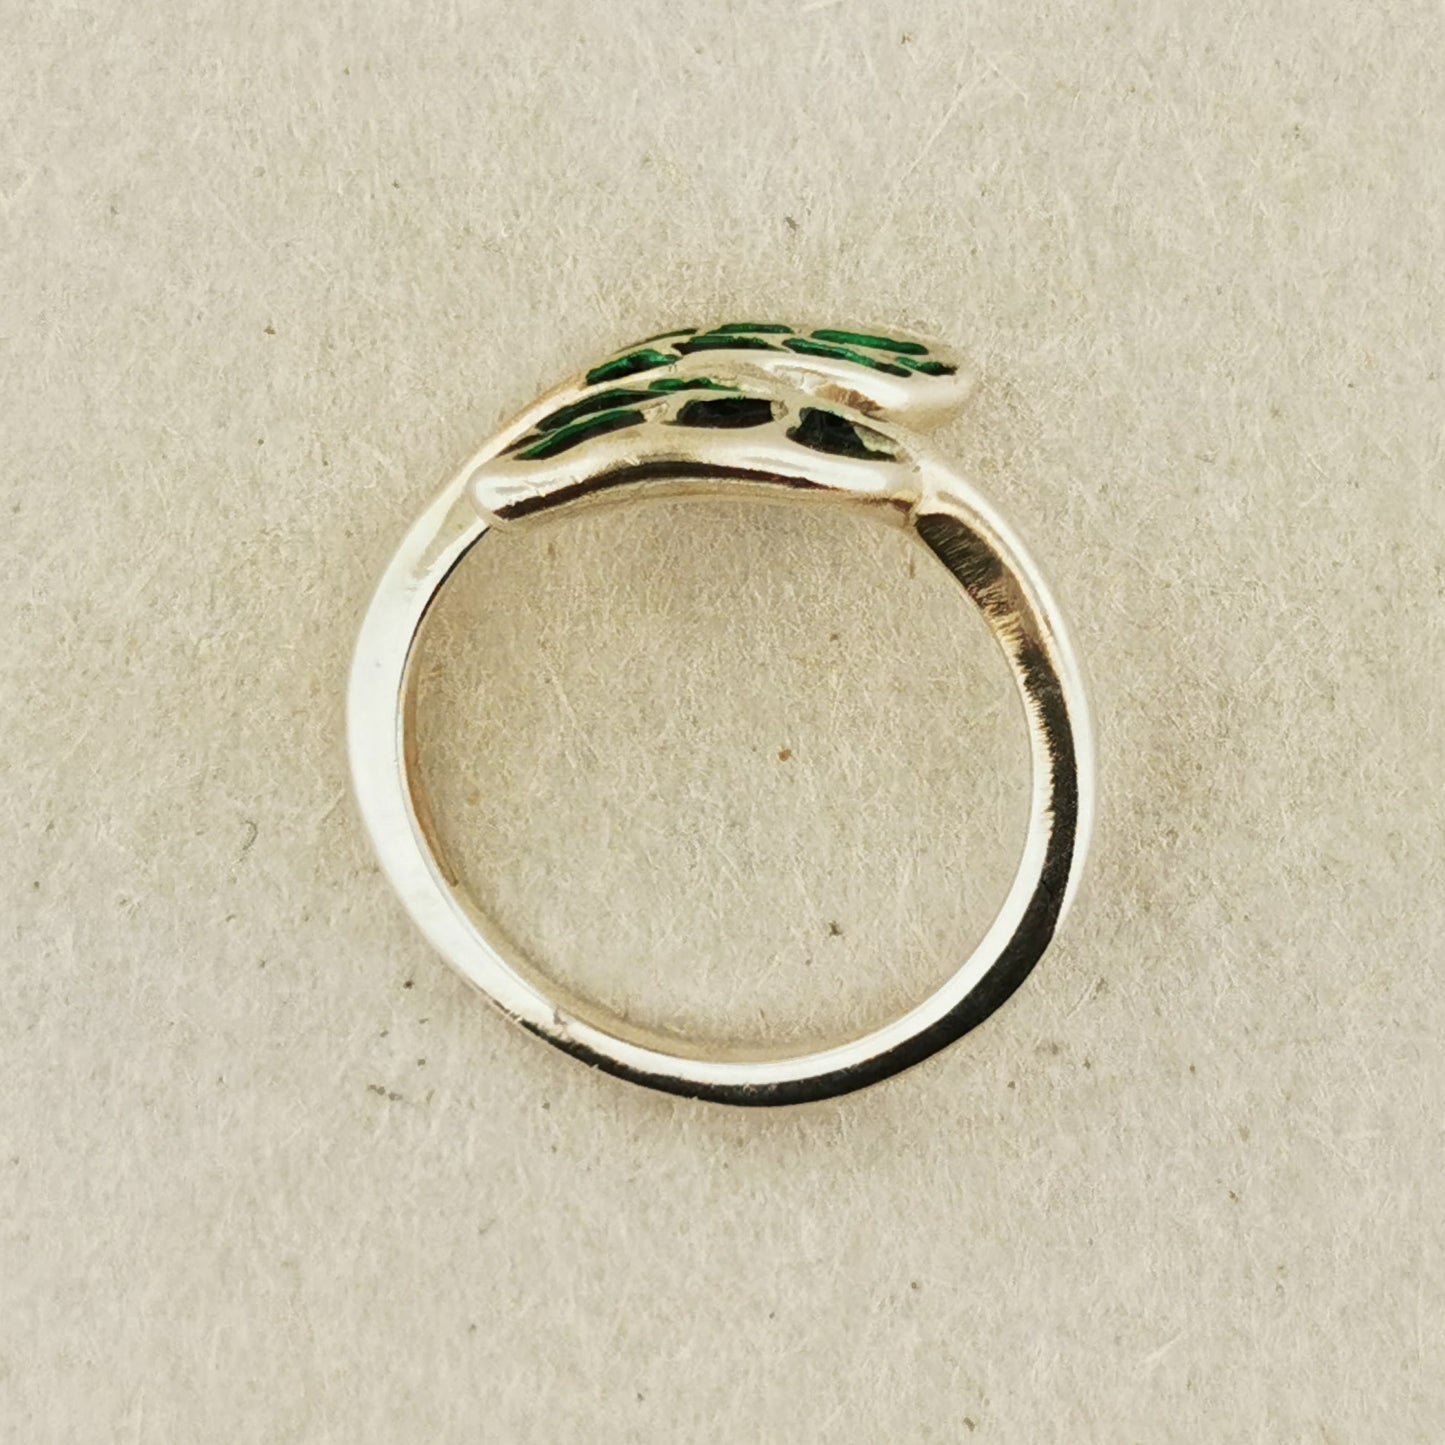 Elvish Leaf Ring in Sterling Silver or Antique Bronze, Sterling Silver Cosplay Ring, Sterling Geek Ring, Silver Movie Ring, Evish Wedding Ring, Elvish Silver Ring, Silver Geek Ring, Precious Metal Geek Jewelry, Elvish Leaf Jewelry